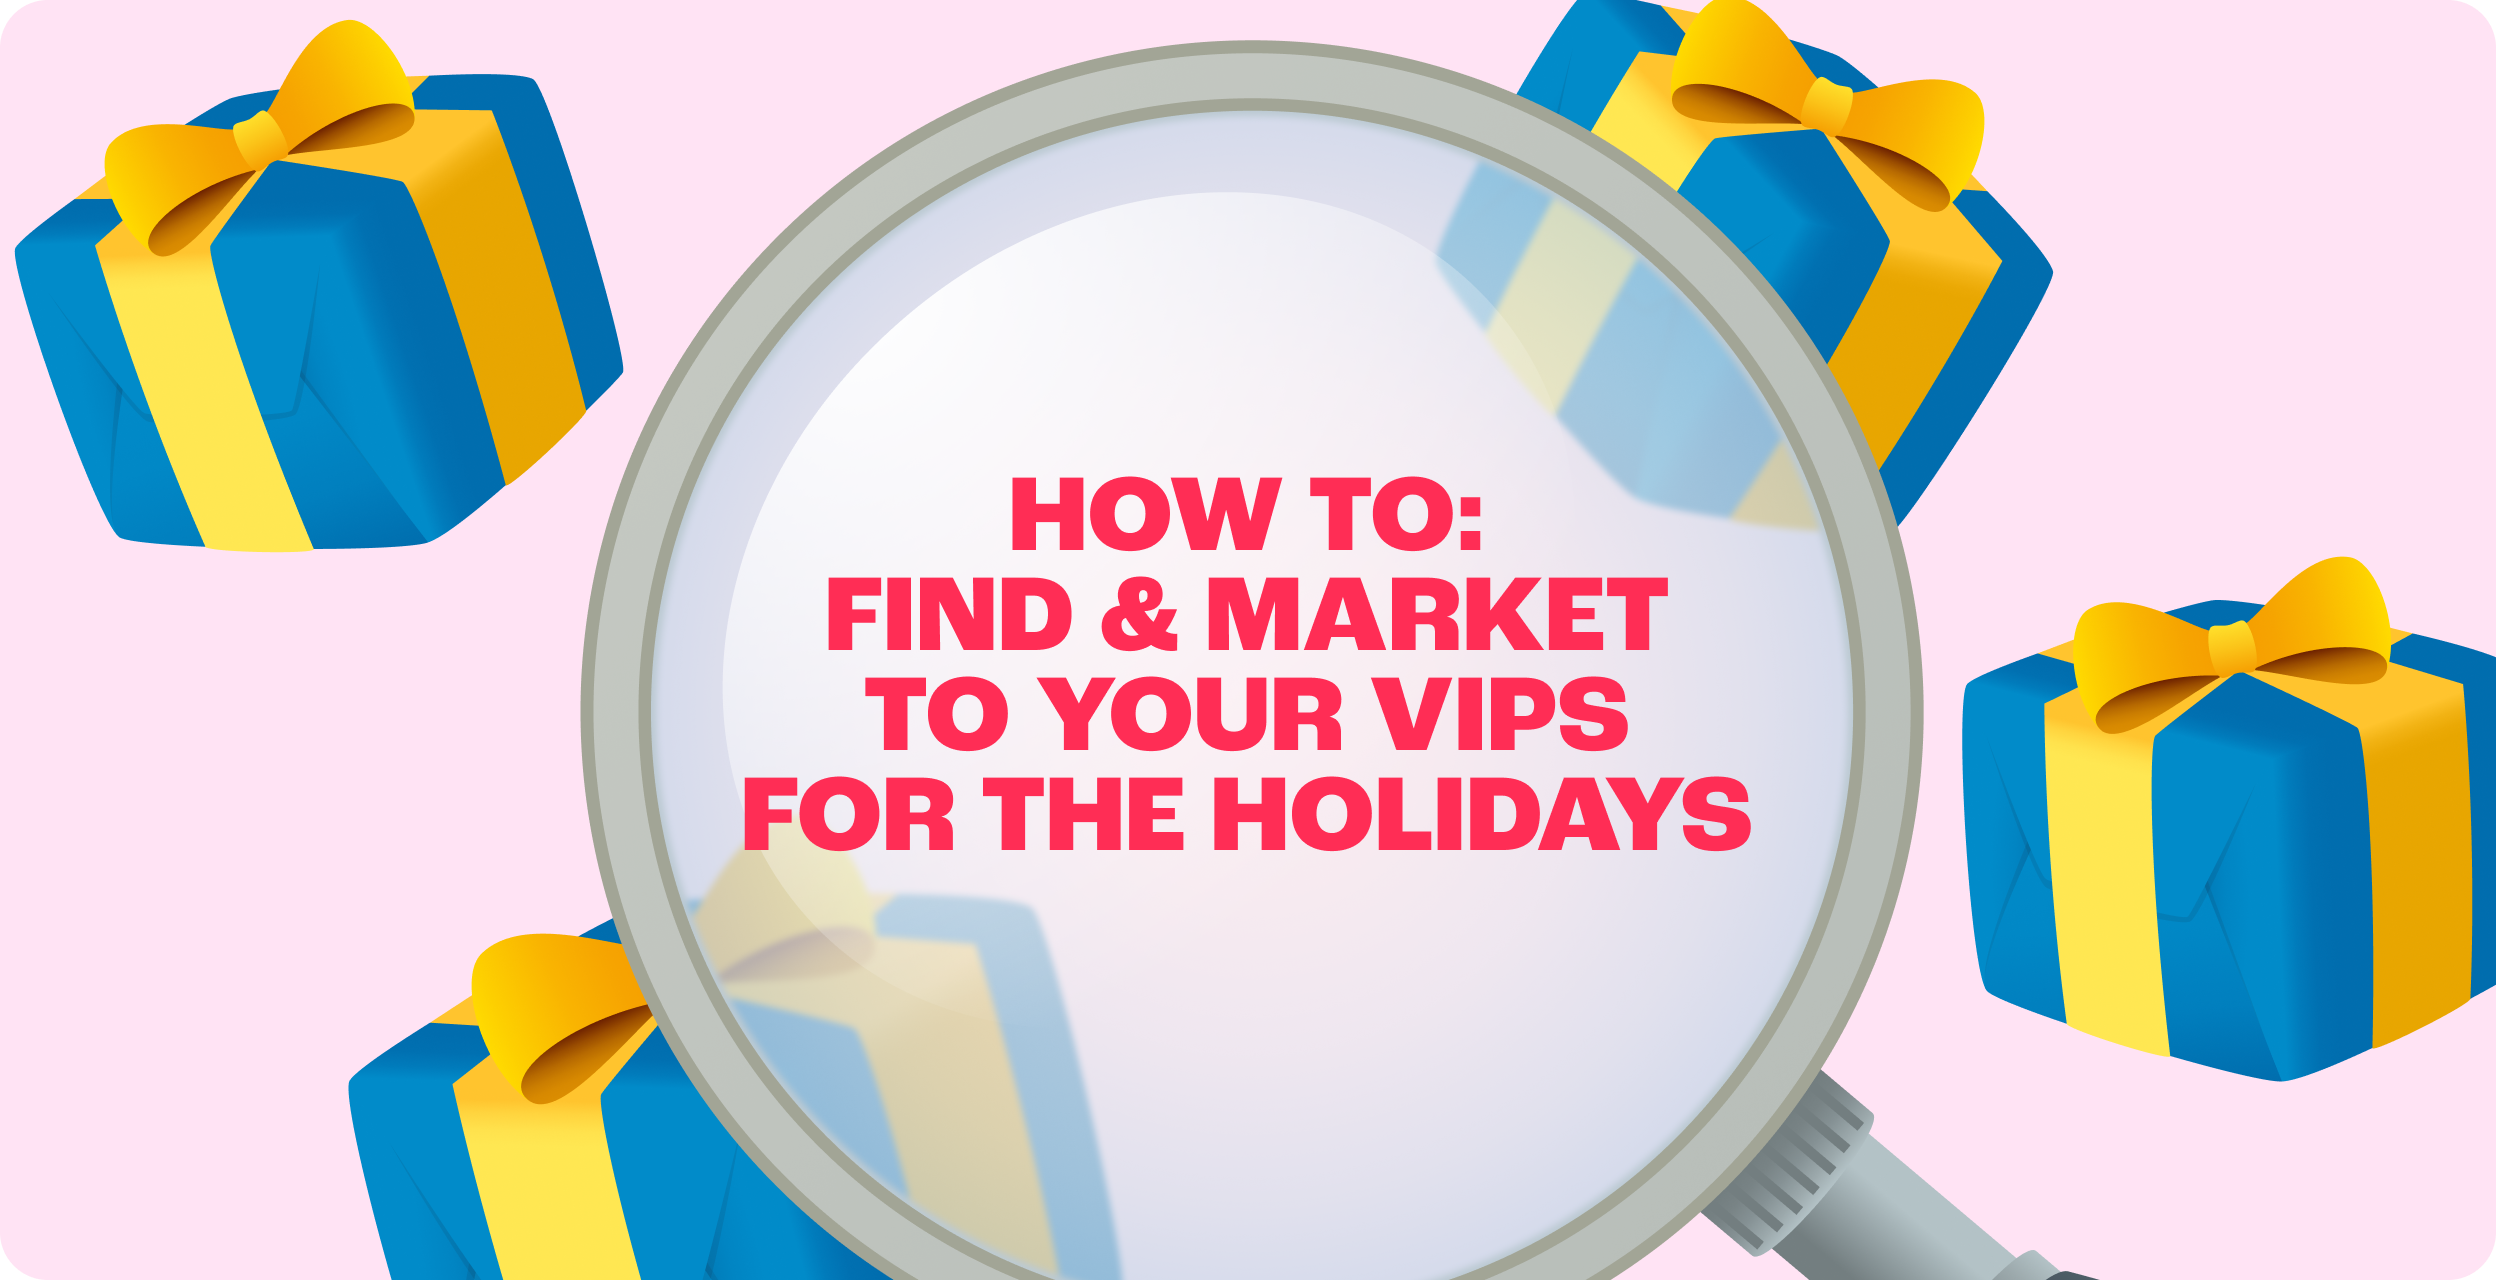 How to Find and Market to Your VIPs for the Holidays